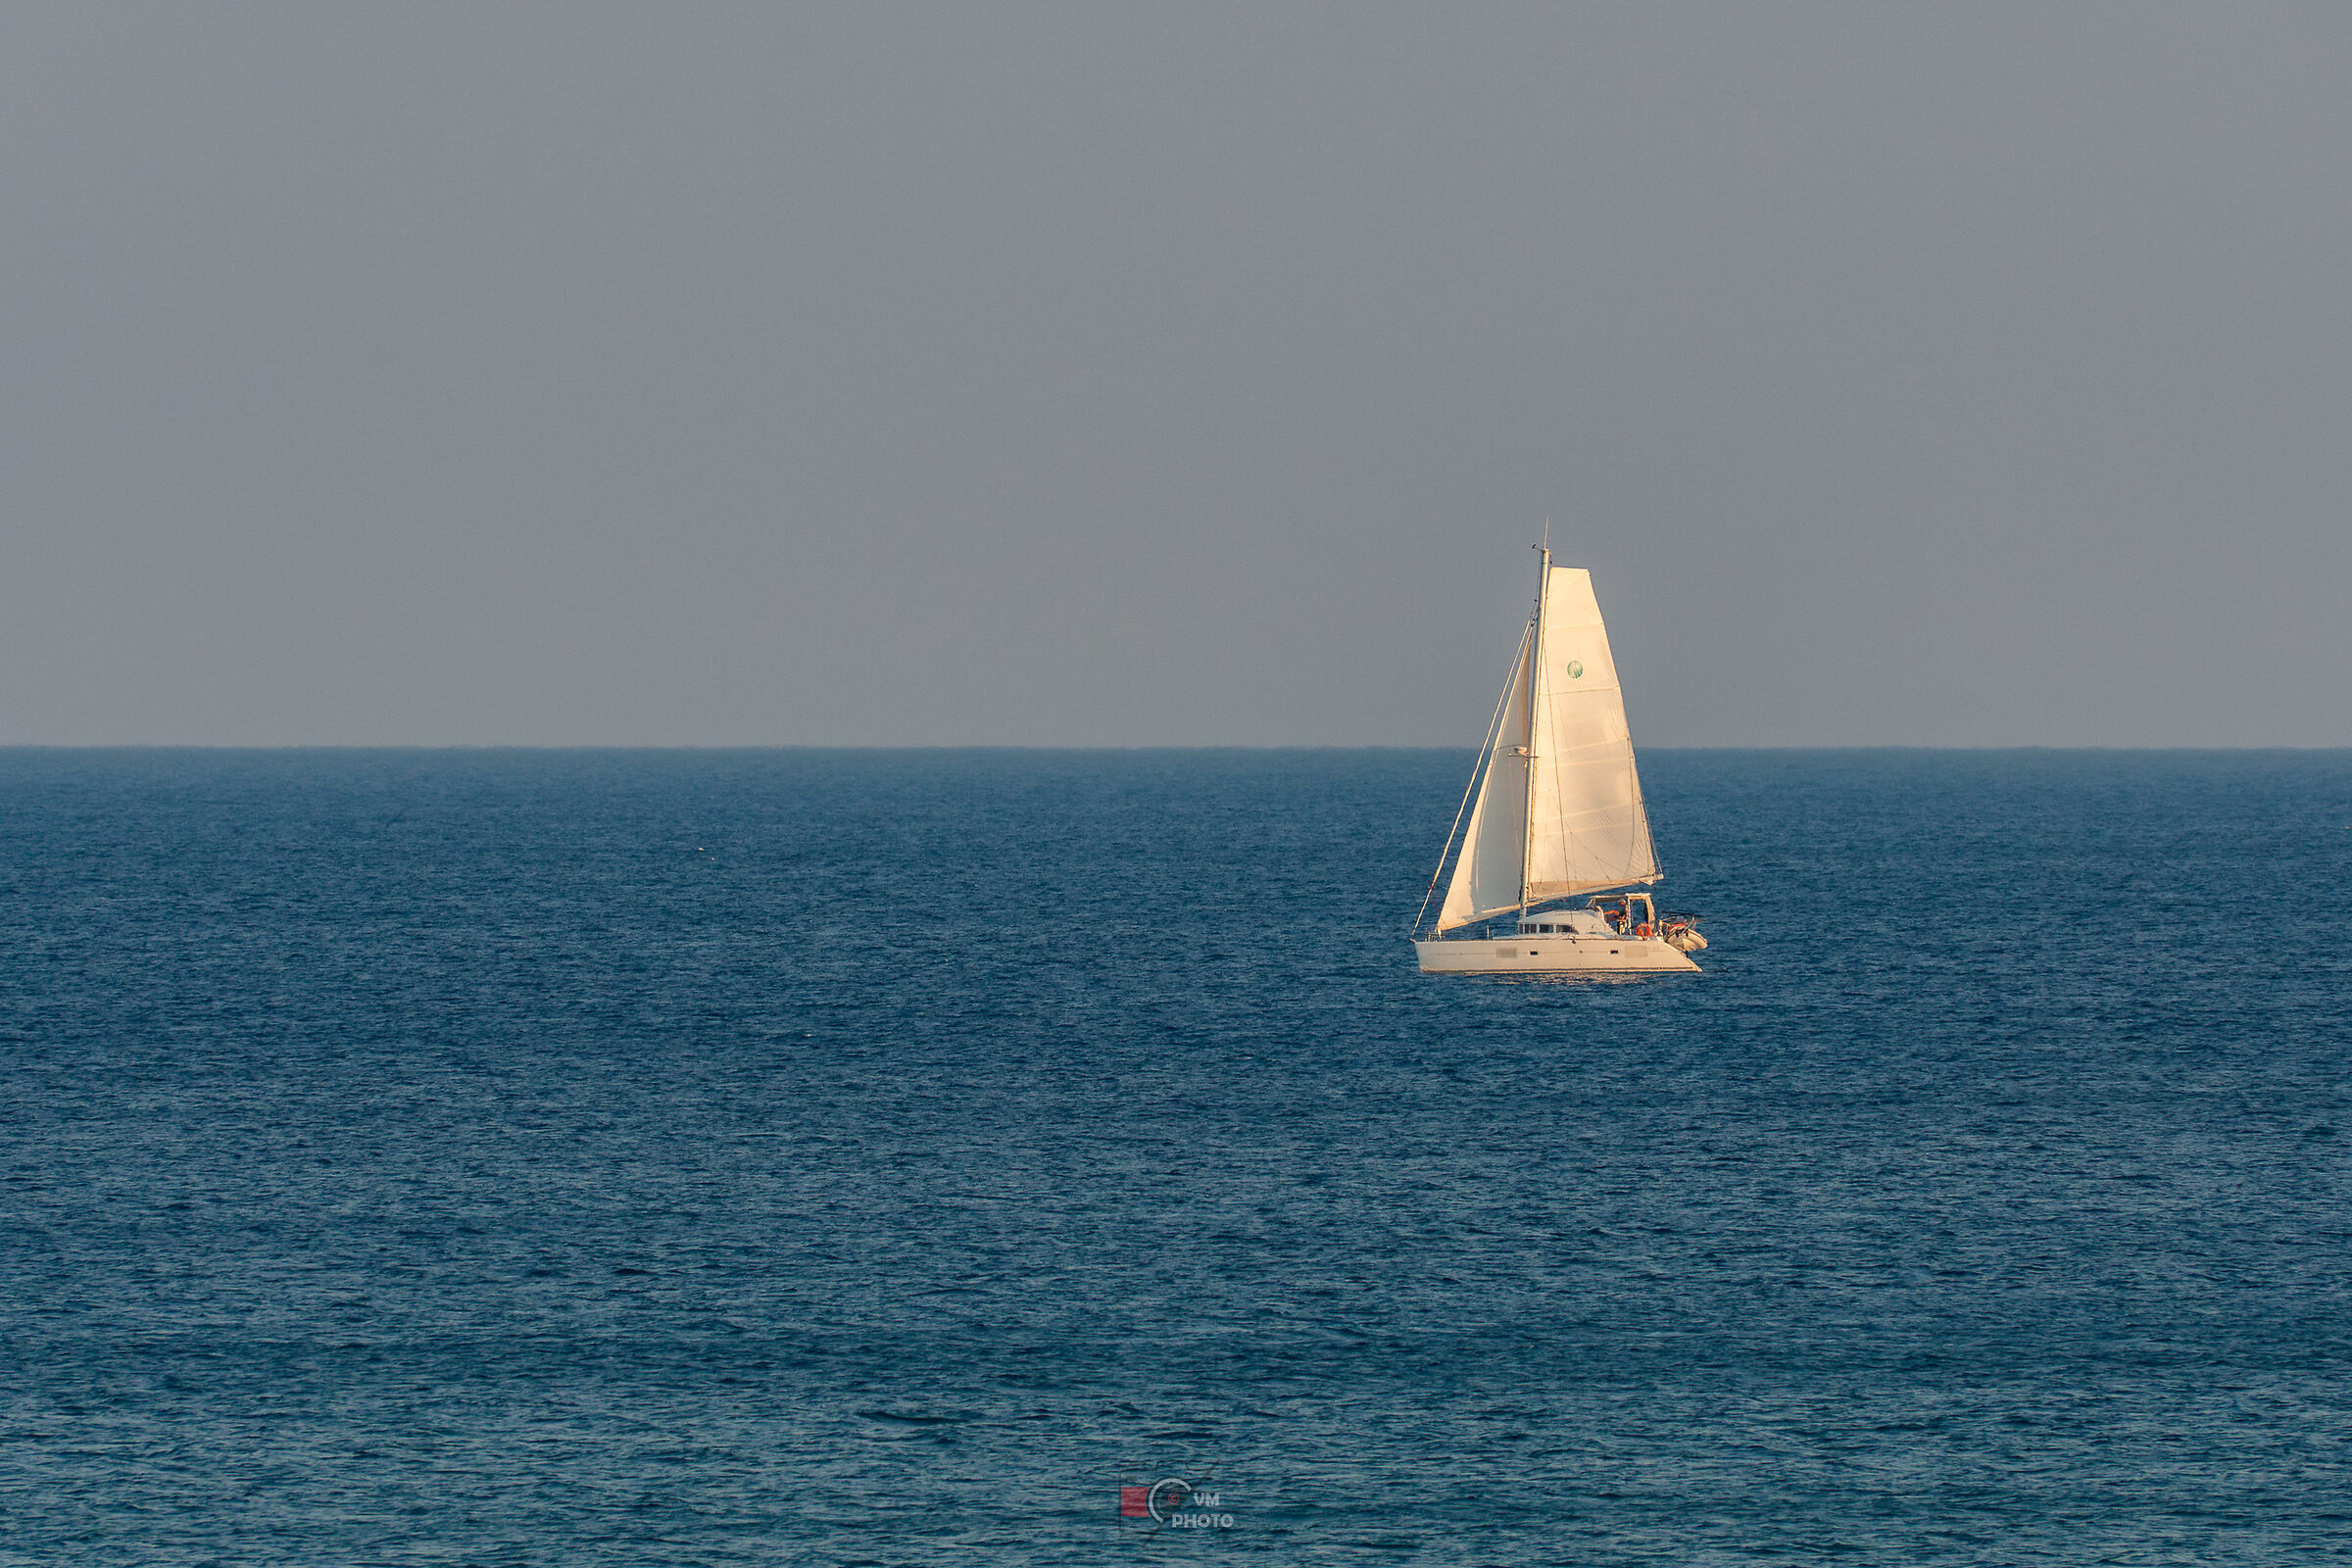 Sailing in the middle of the sea...